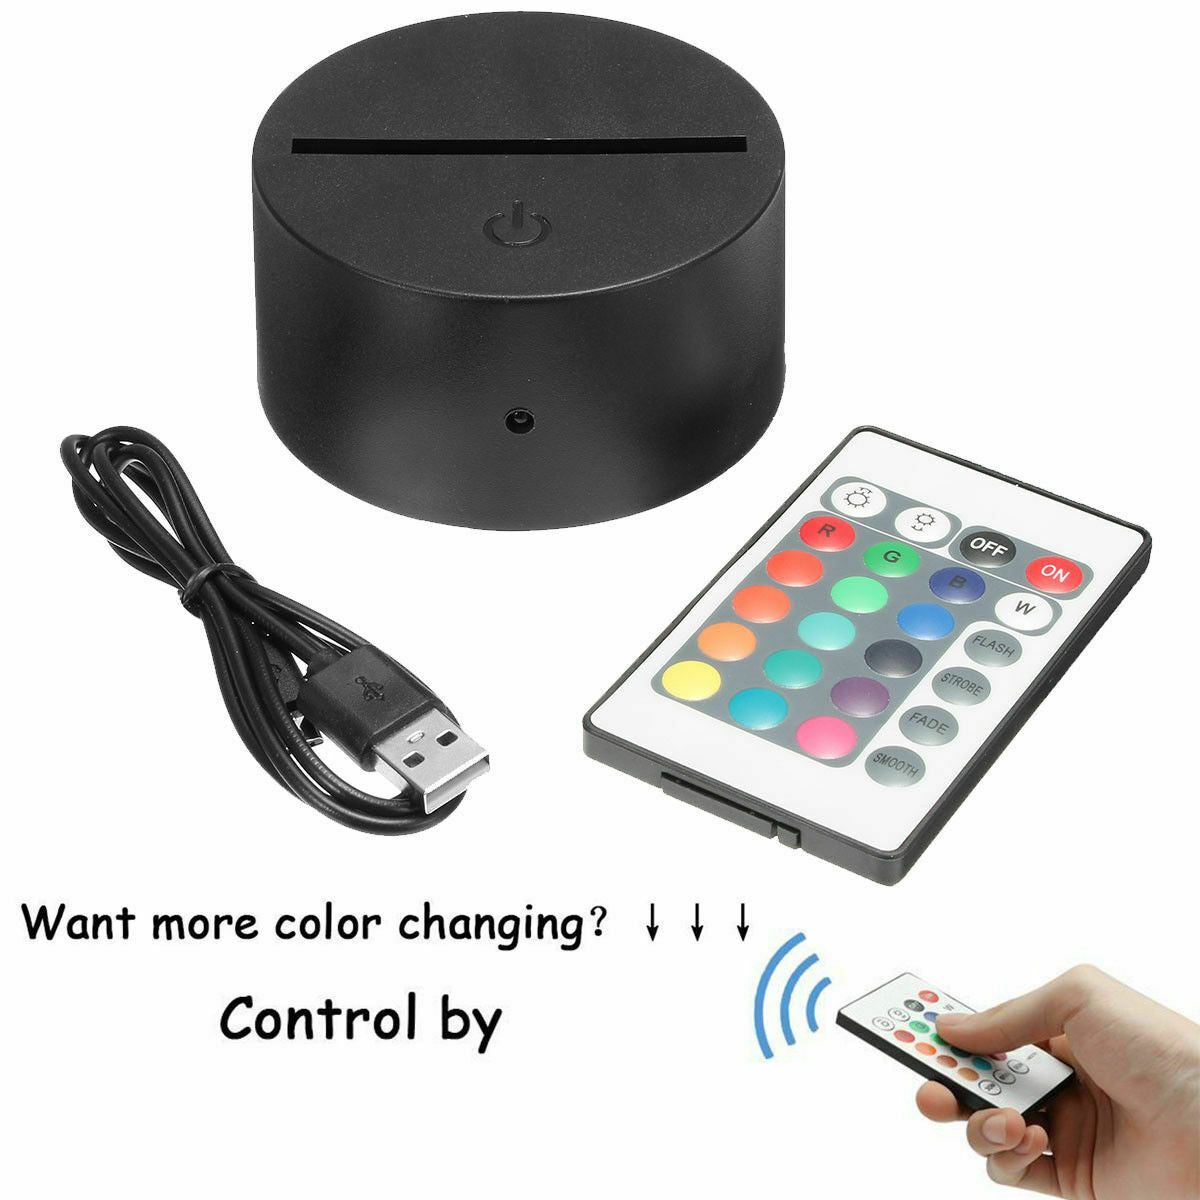 ABS Acrylic Black 3W DC5V LED Lamp Night Light Base USB Cable Remote control S15